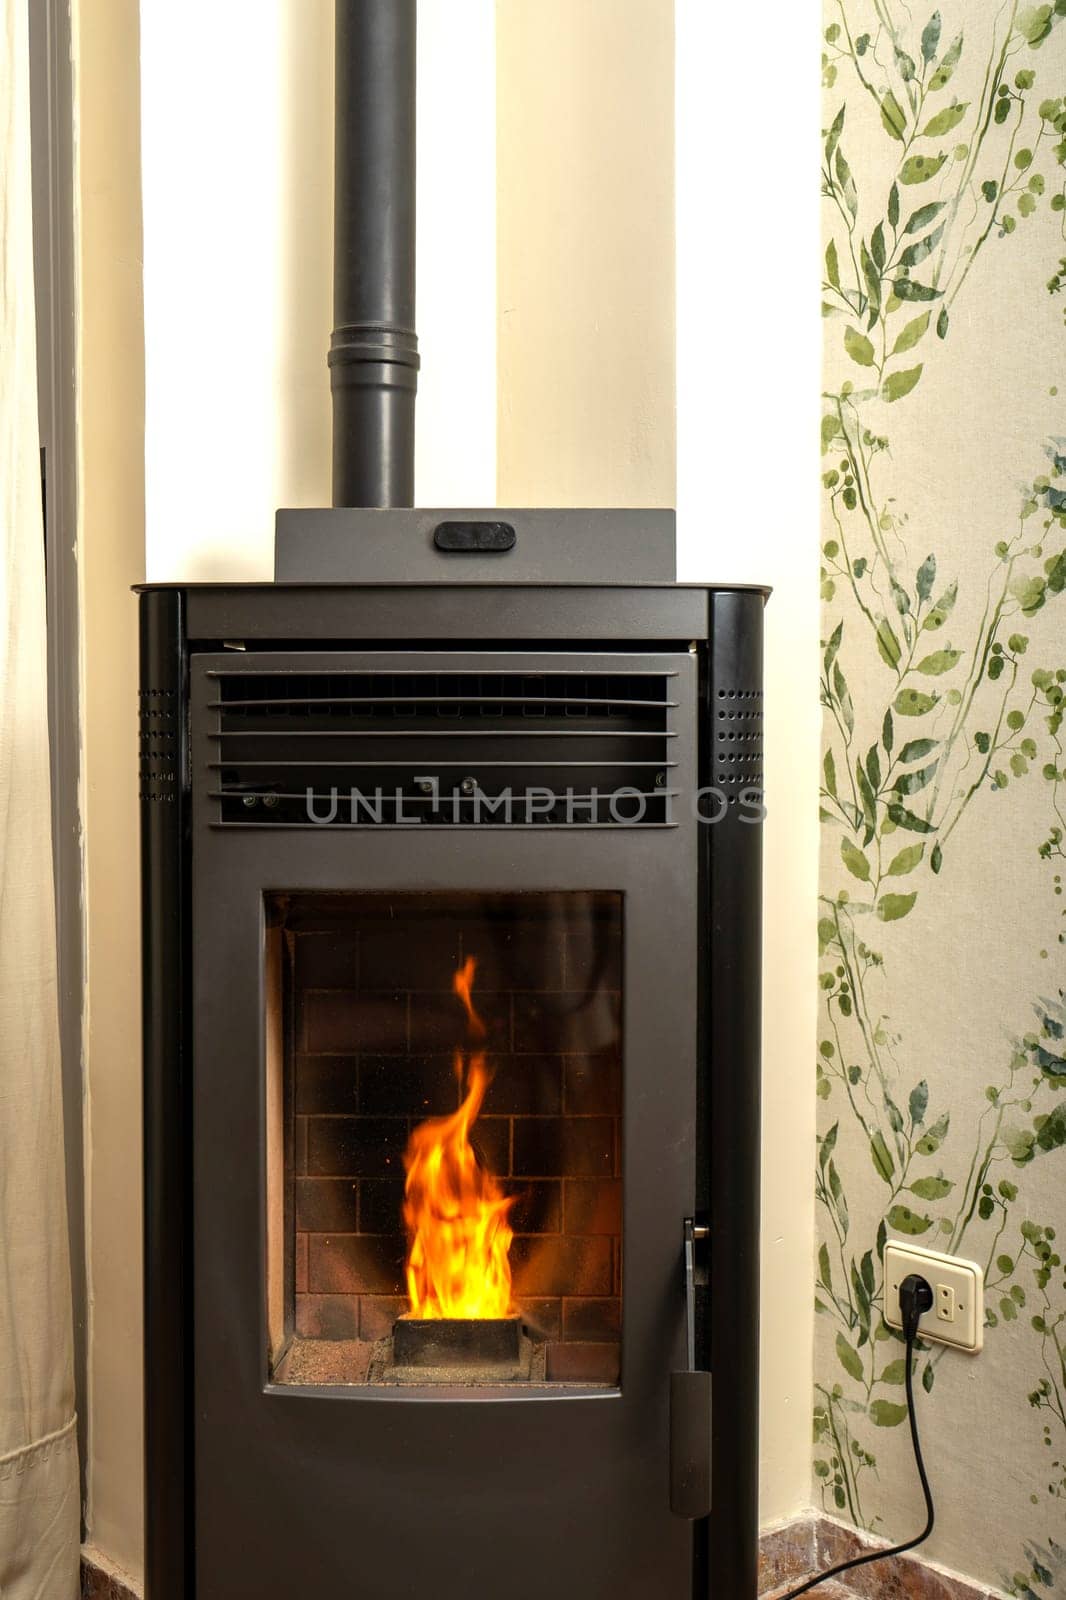 Vertical image of a pellet stove with a beautiful flame inside a living room of a house. Renewable energy source. Biomass in pellet form. Green energy